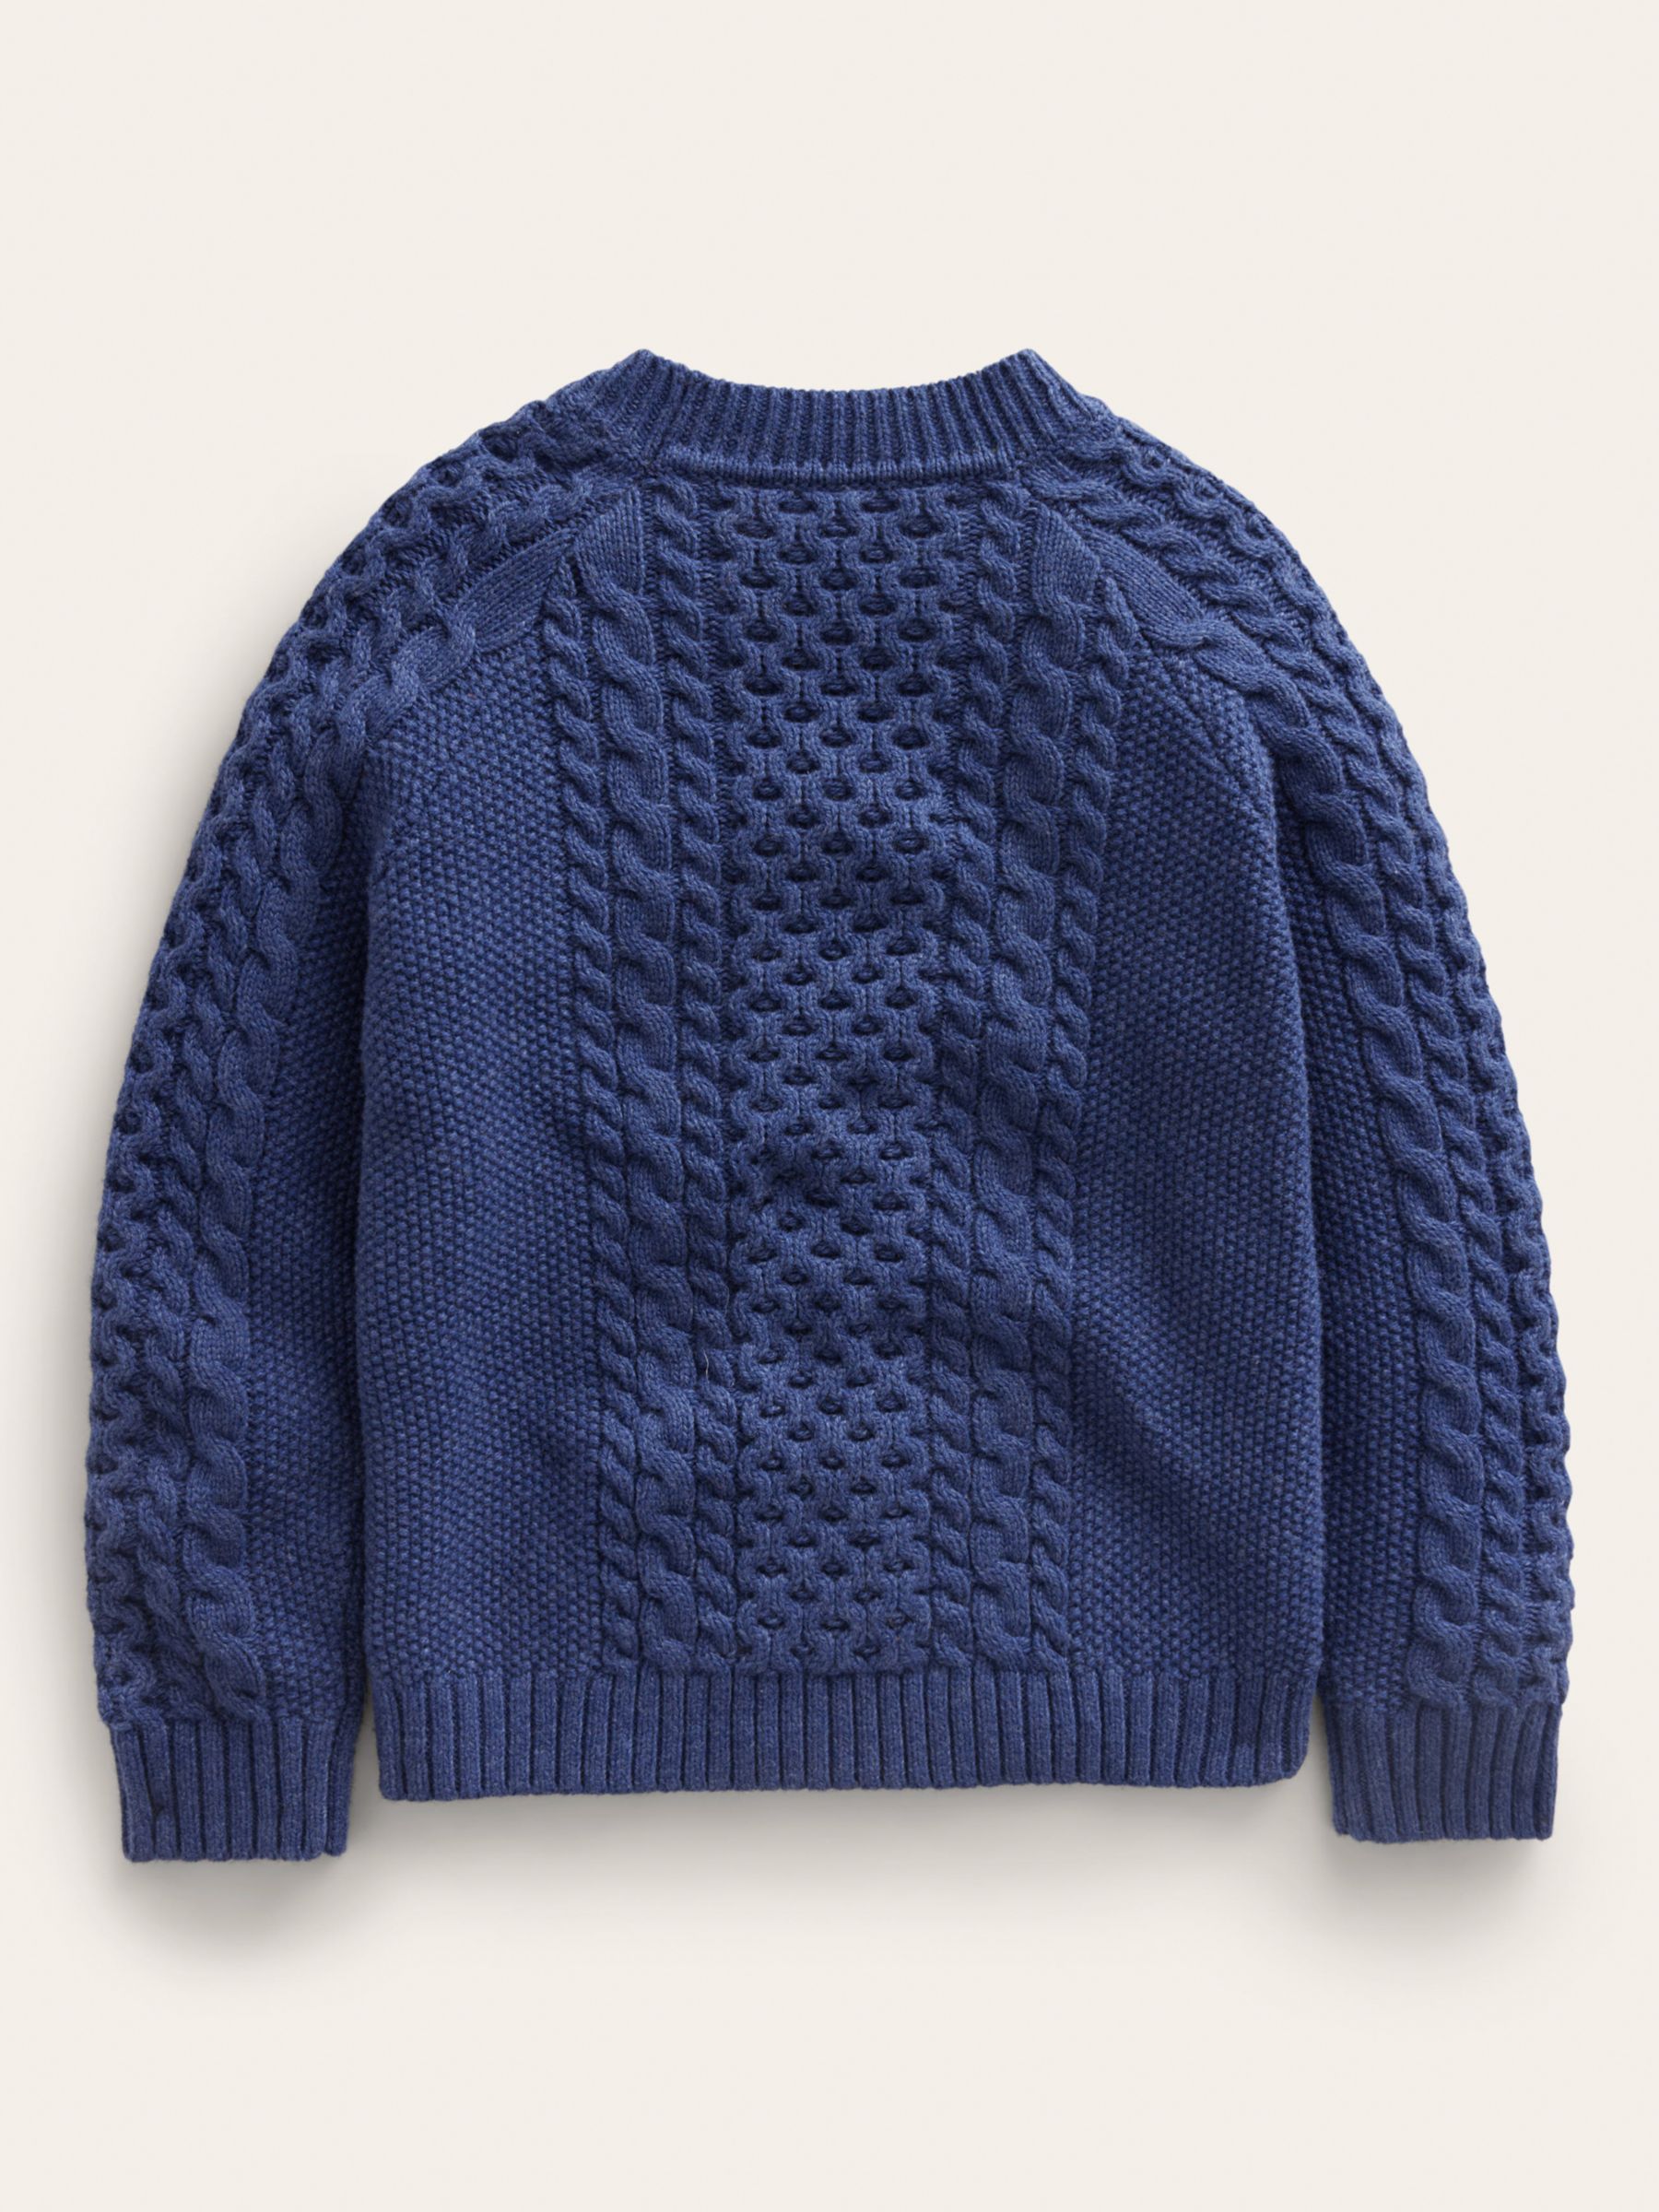 Mini Boden Kids' Heritage Cable Knit Jumper, College Navy, 6-7 years